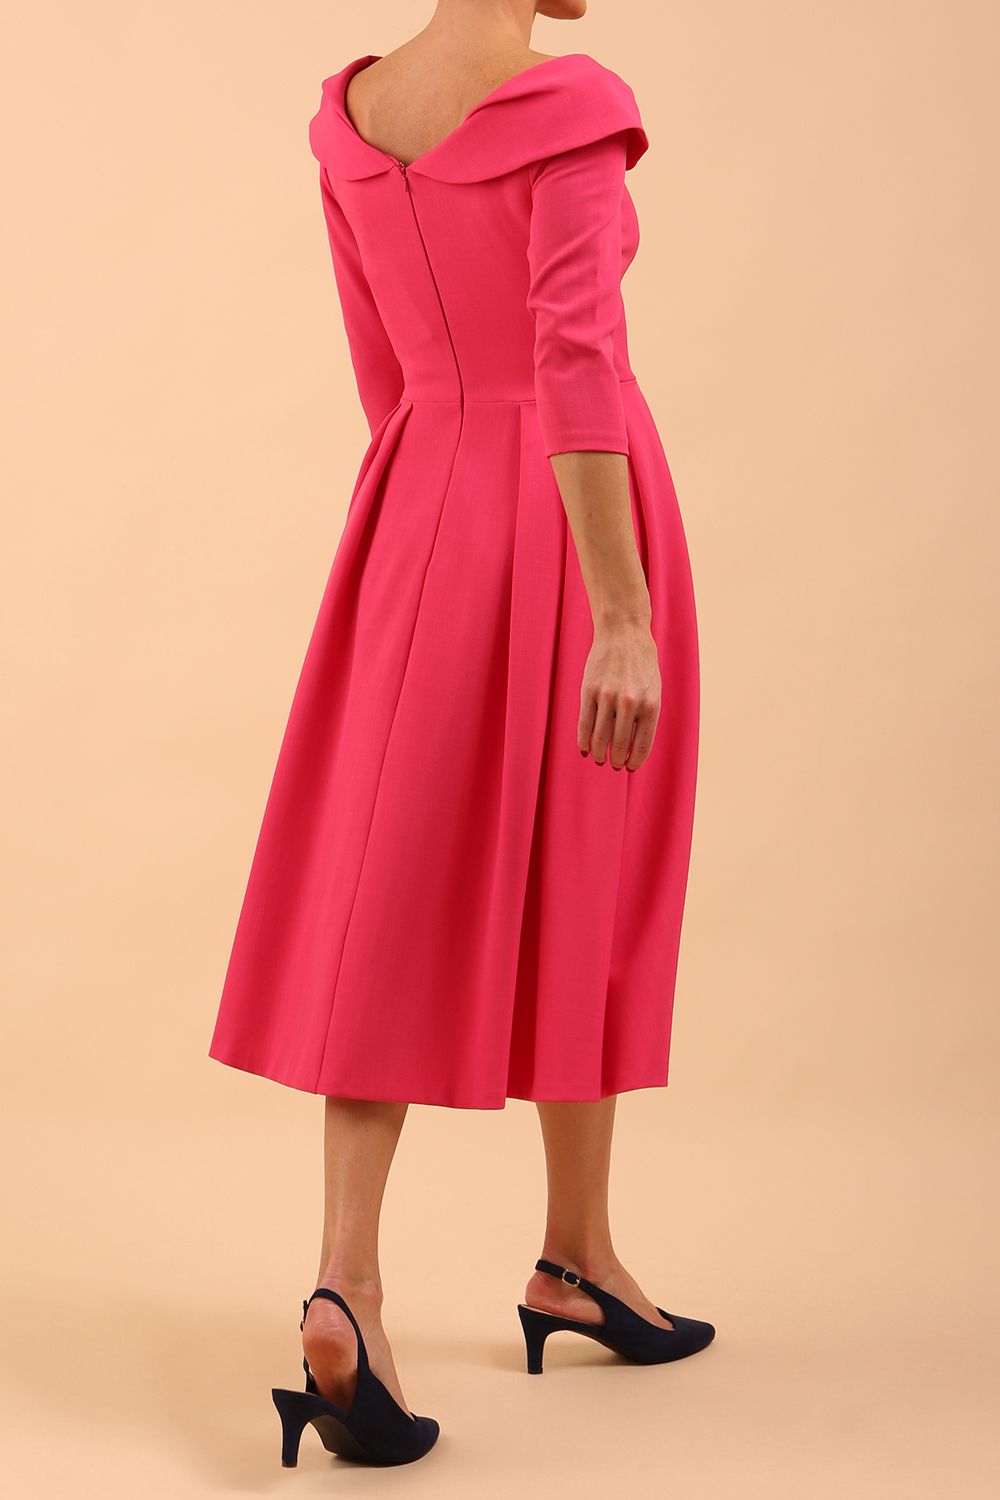 Model wearing Diva Catwalk Chesterton Sleeved dress with oversized collar detail and a-line swing pleated skirt in colour fuchsia pink back